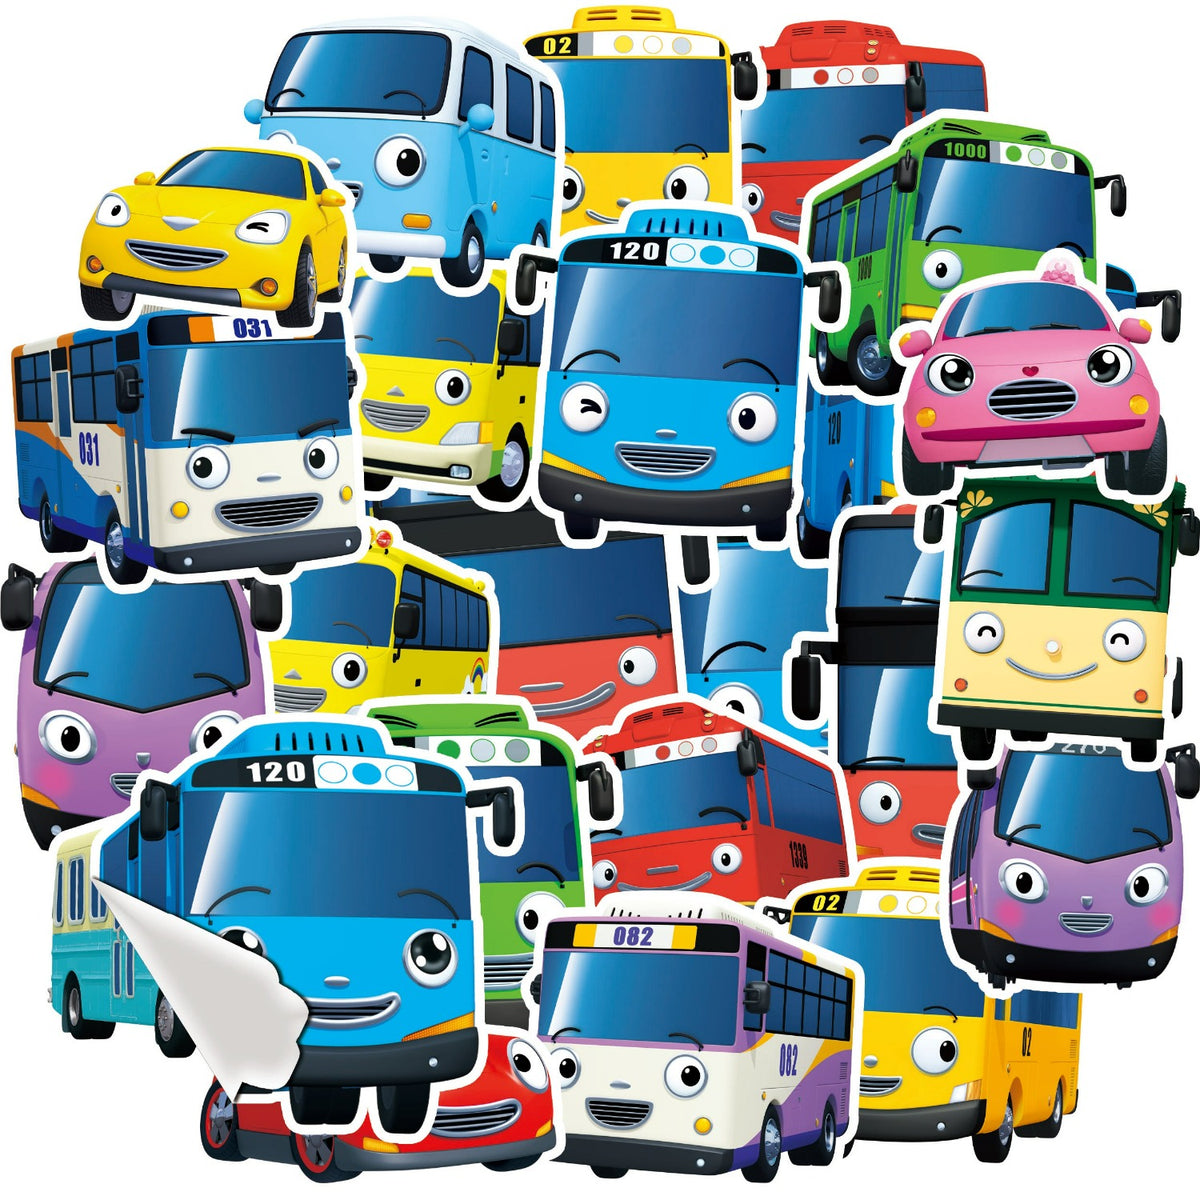 "Tayo the Little Bus" Vibrant Sticker Collection - Set of 25